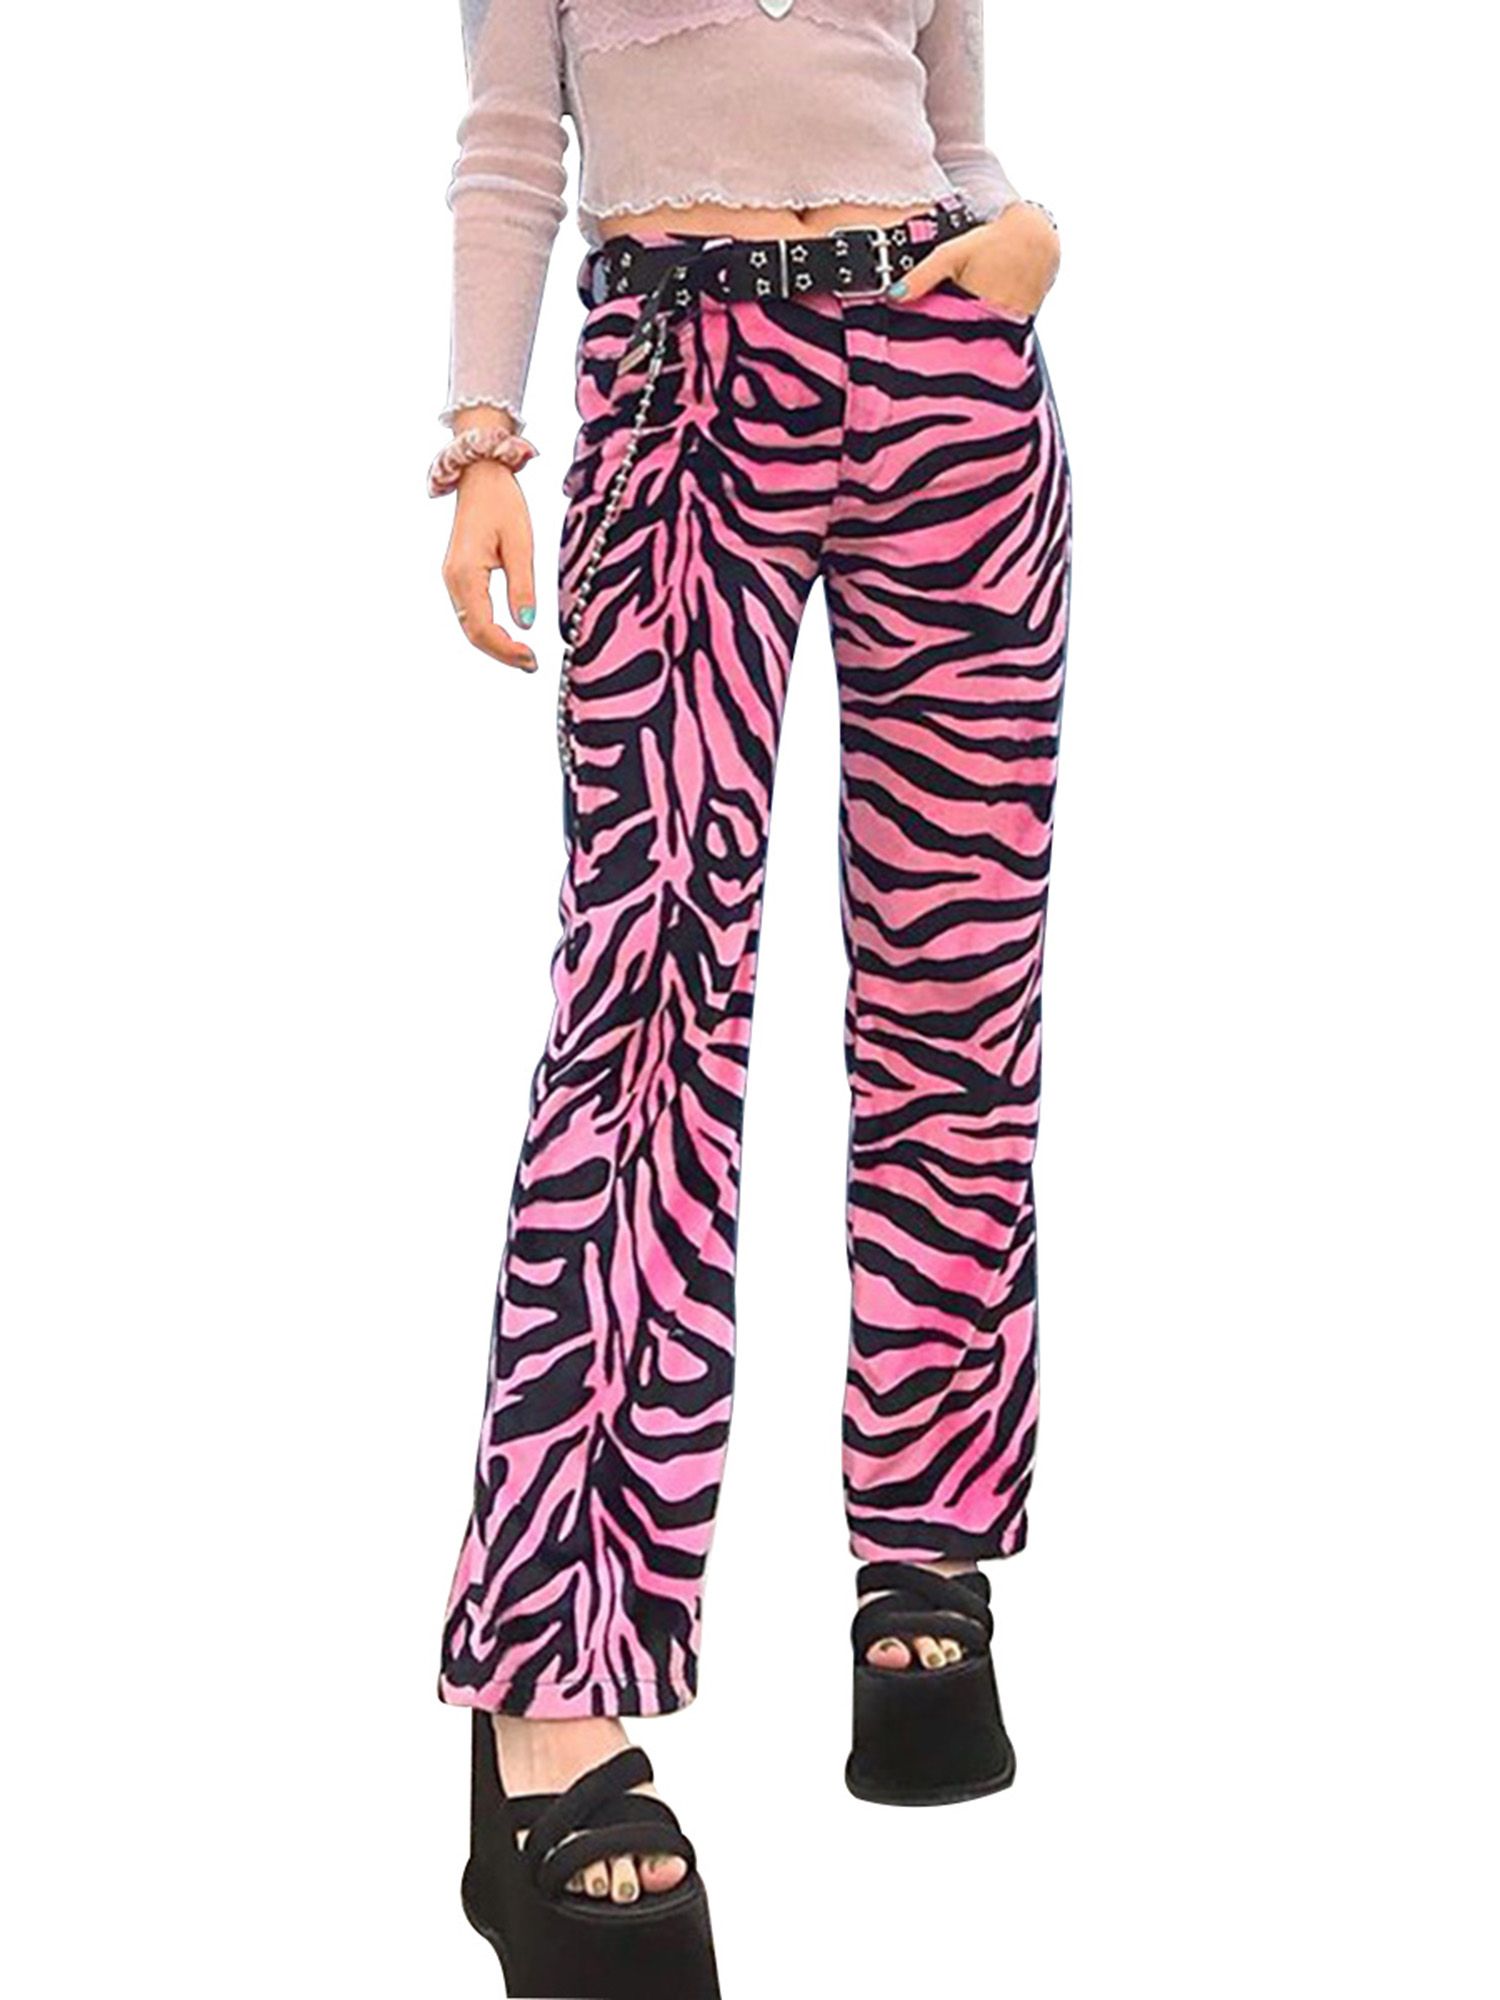 This is the nicest zebra print on pants I have seen, does anyone